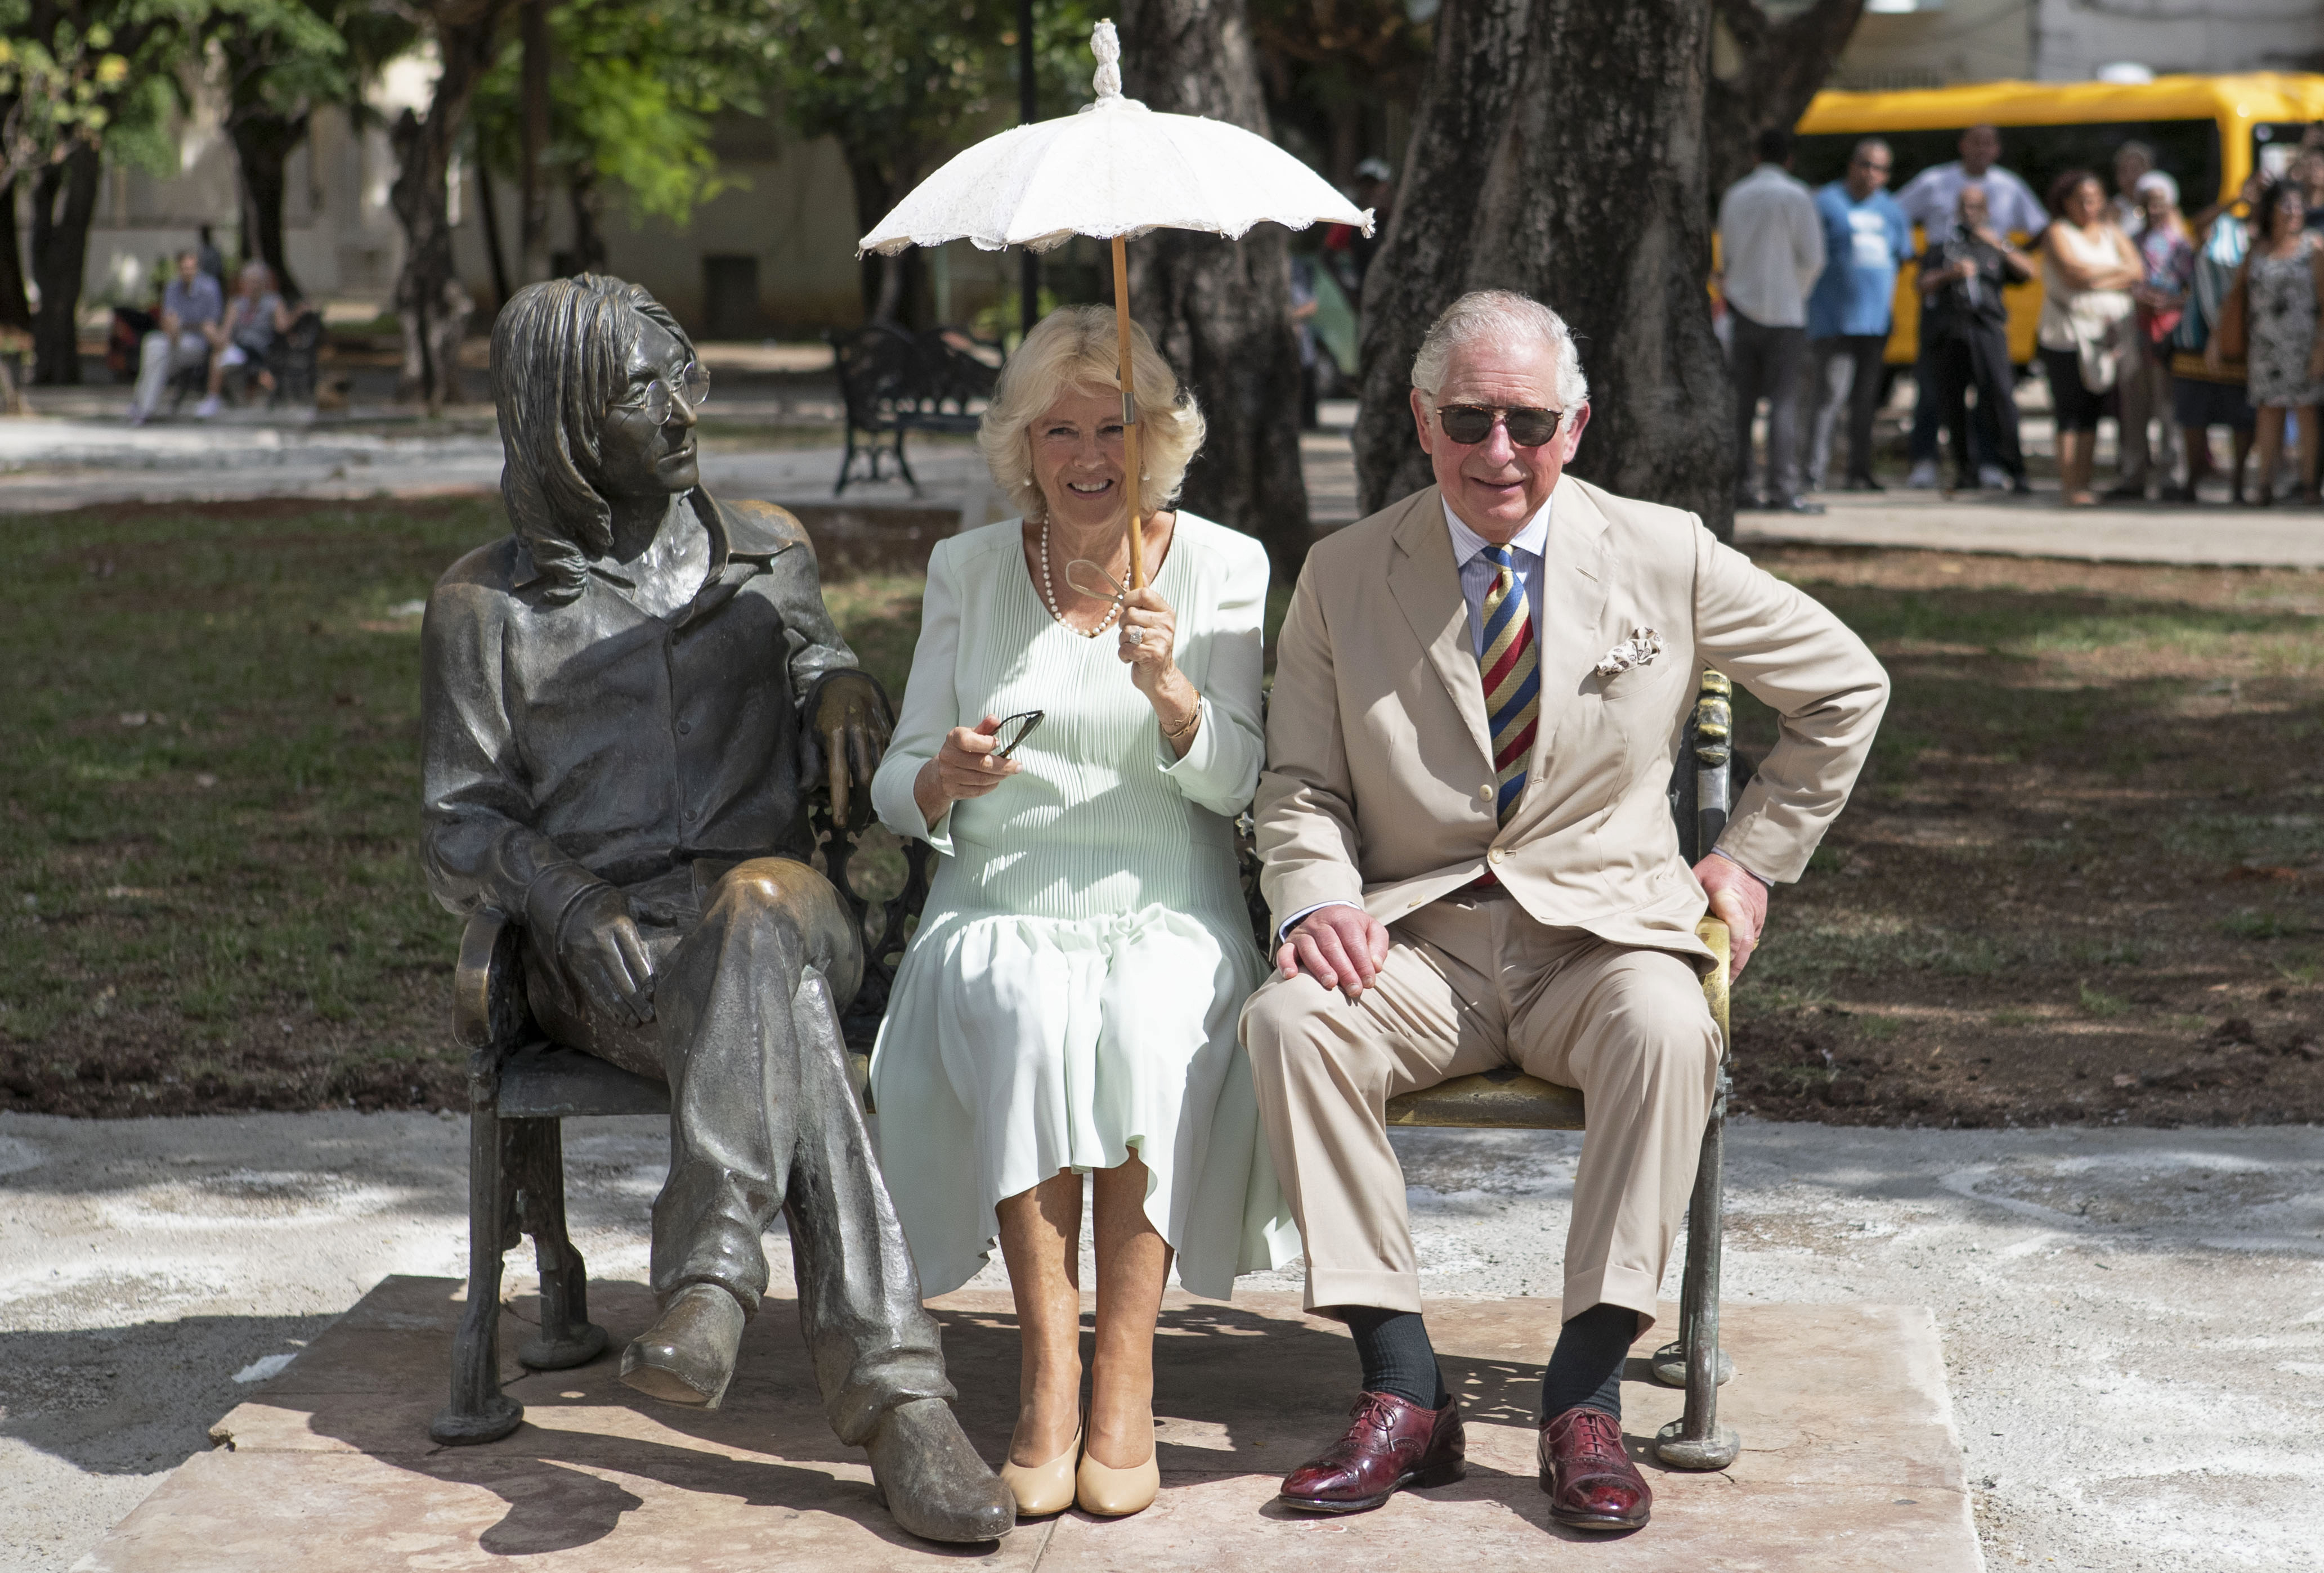 Charles and Camilla sit on the John Lennon memorial bench in Havana, Cuba in 2019 